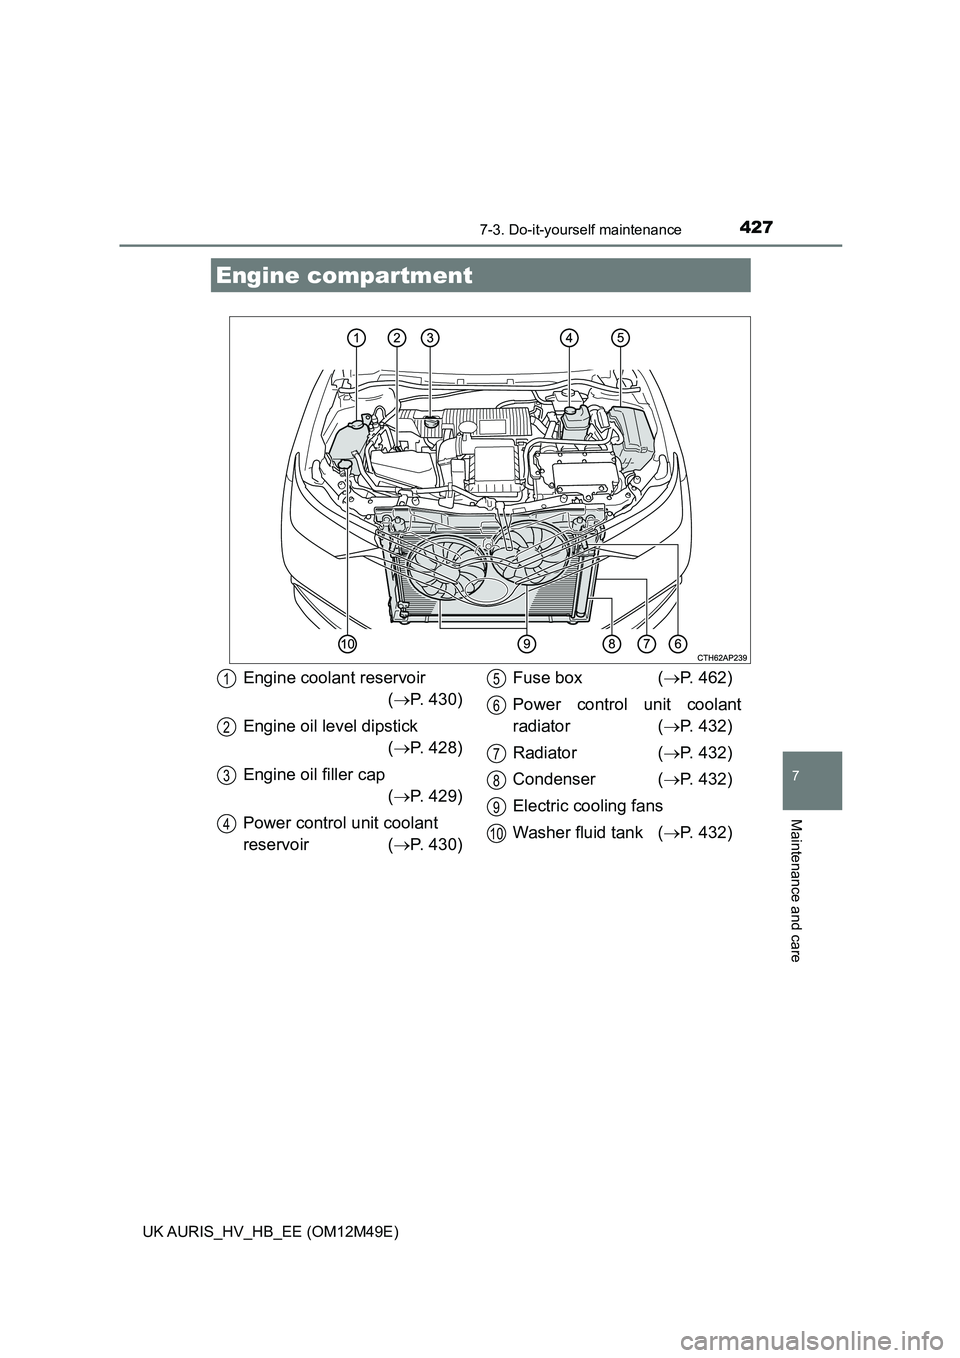 TOYOTA AURIS 2018  Owners Manual (in English) 4277-3. Do-it-yourself maintenance
UK AURIS_HV_HB_EE (OM12M49E)
7
Maintenance and care
Engine compartment
Engine coolant reservoir 
( P. 430) 
Engine oil level dipstick 
( P. 428) 
Engine oil fi